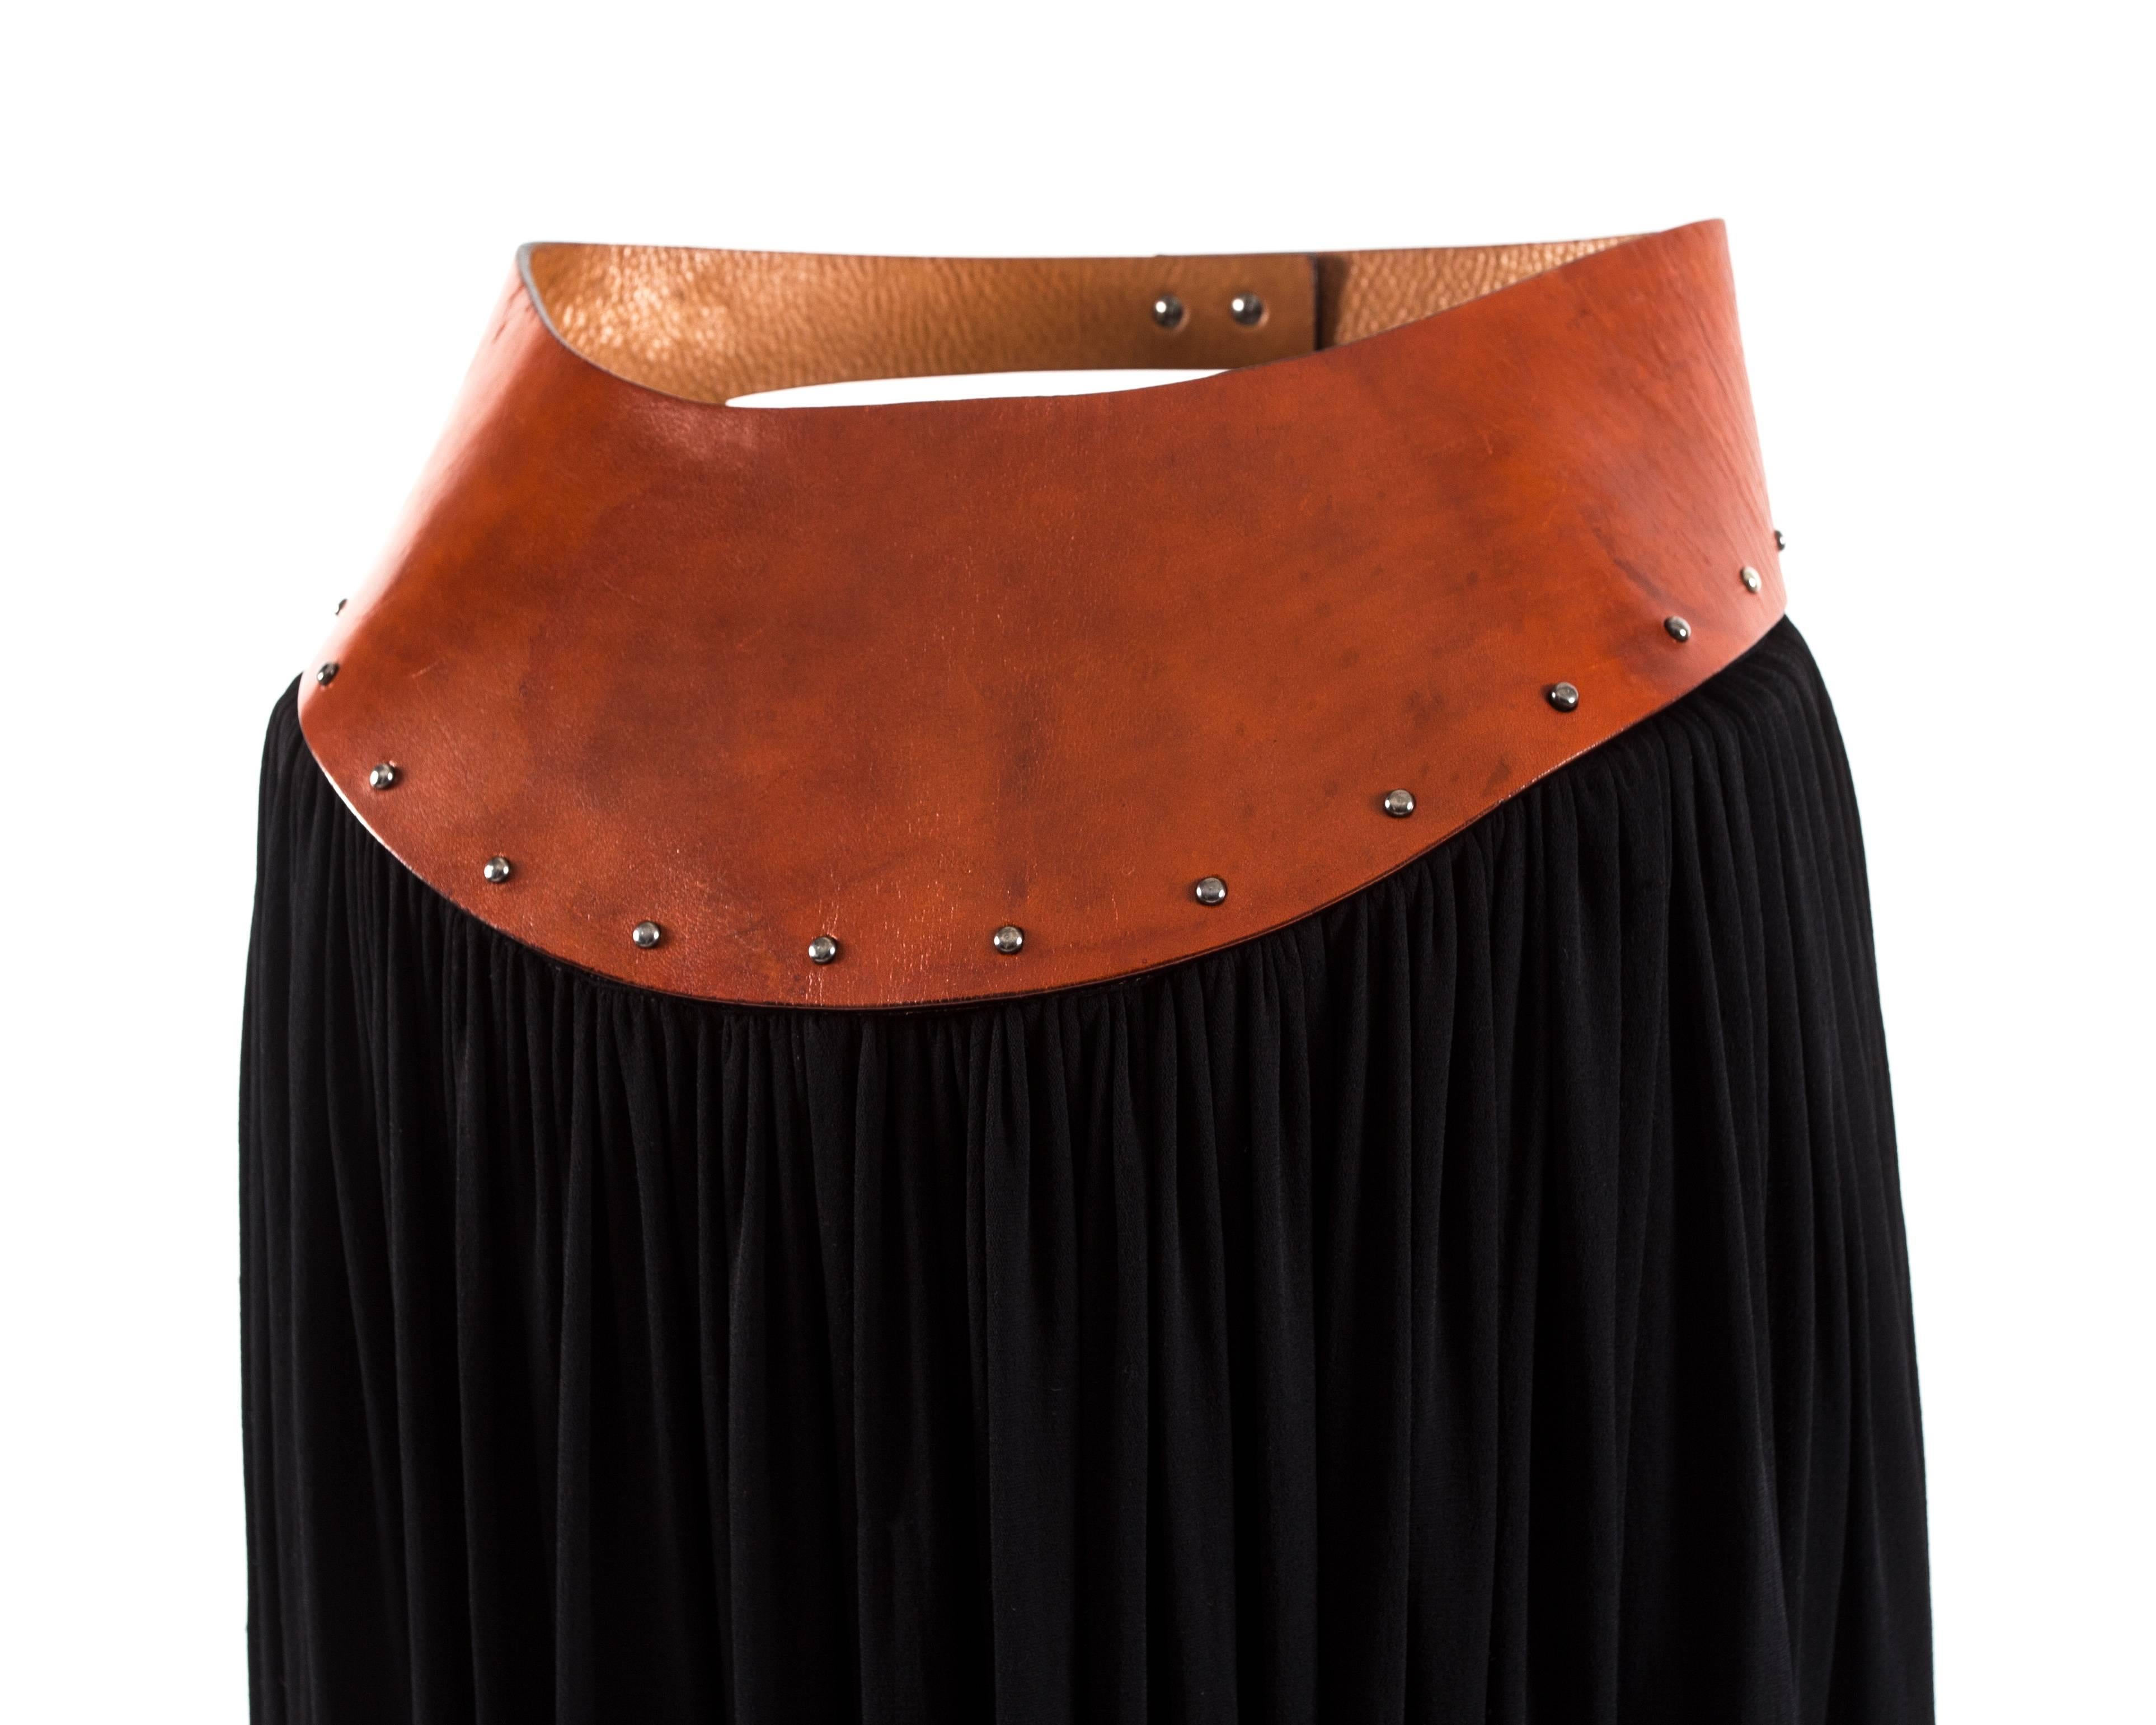 Black Jean Paul Gaultier black pleated skirt with tan leather waistband, ss 2000 For Sale